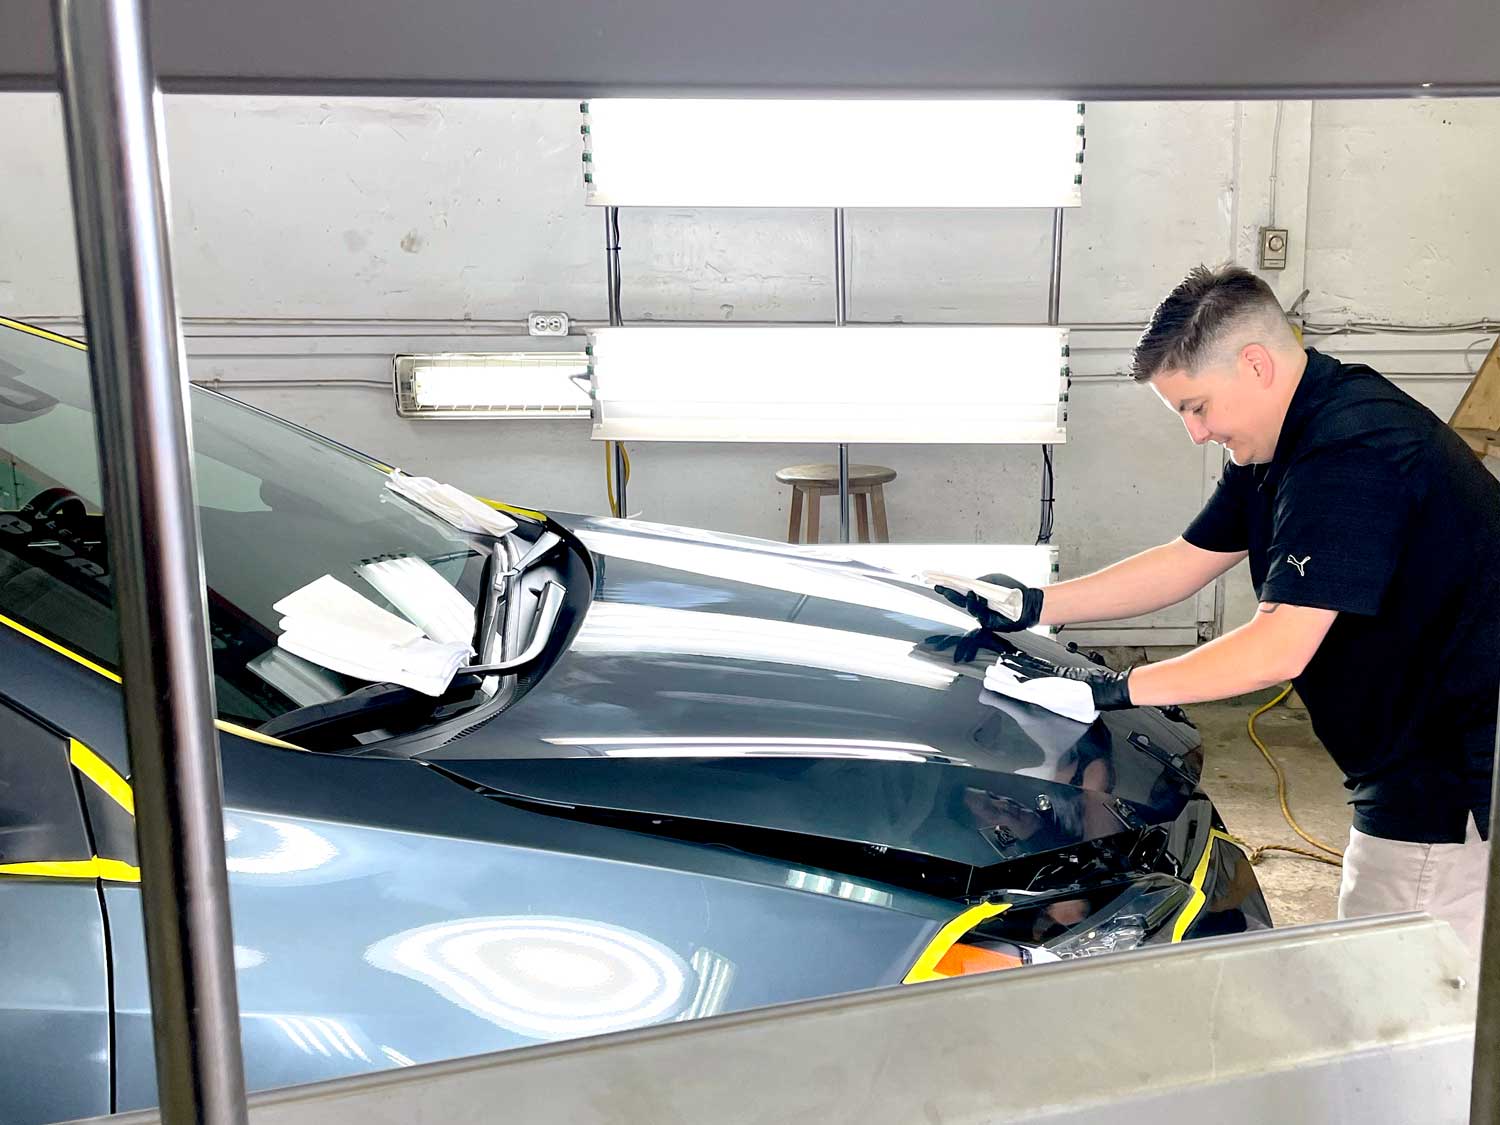 RestorFX Moncton technician applying product onto shiny vehicle surface during restoration process